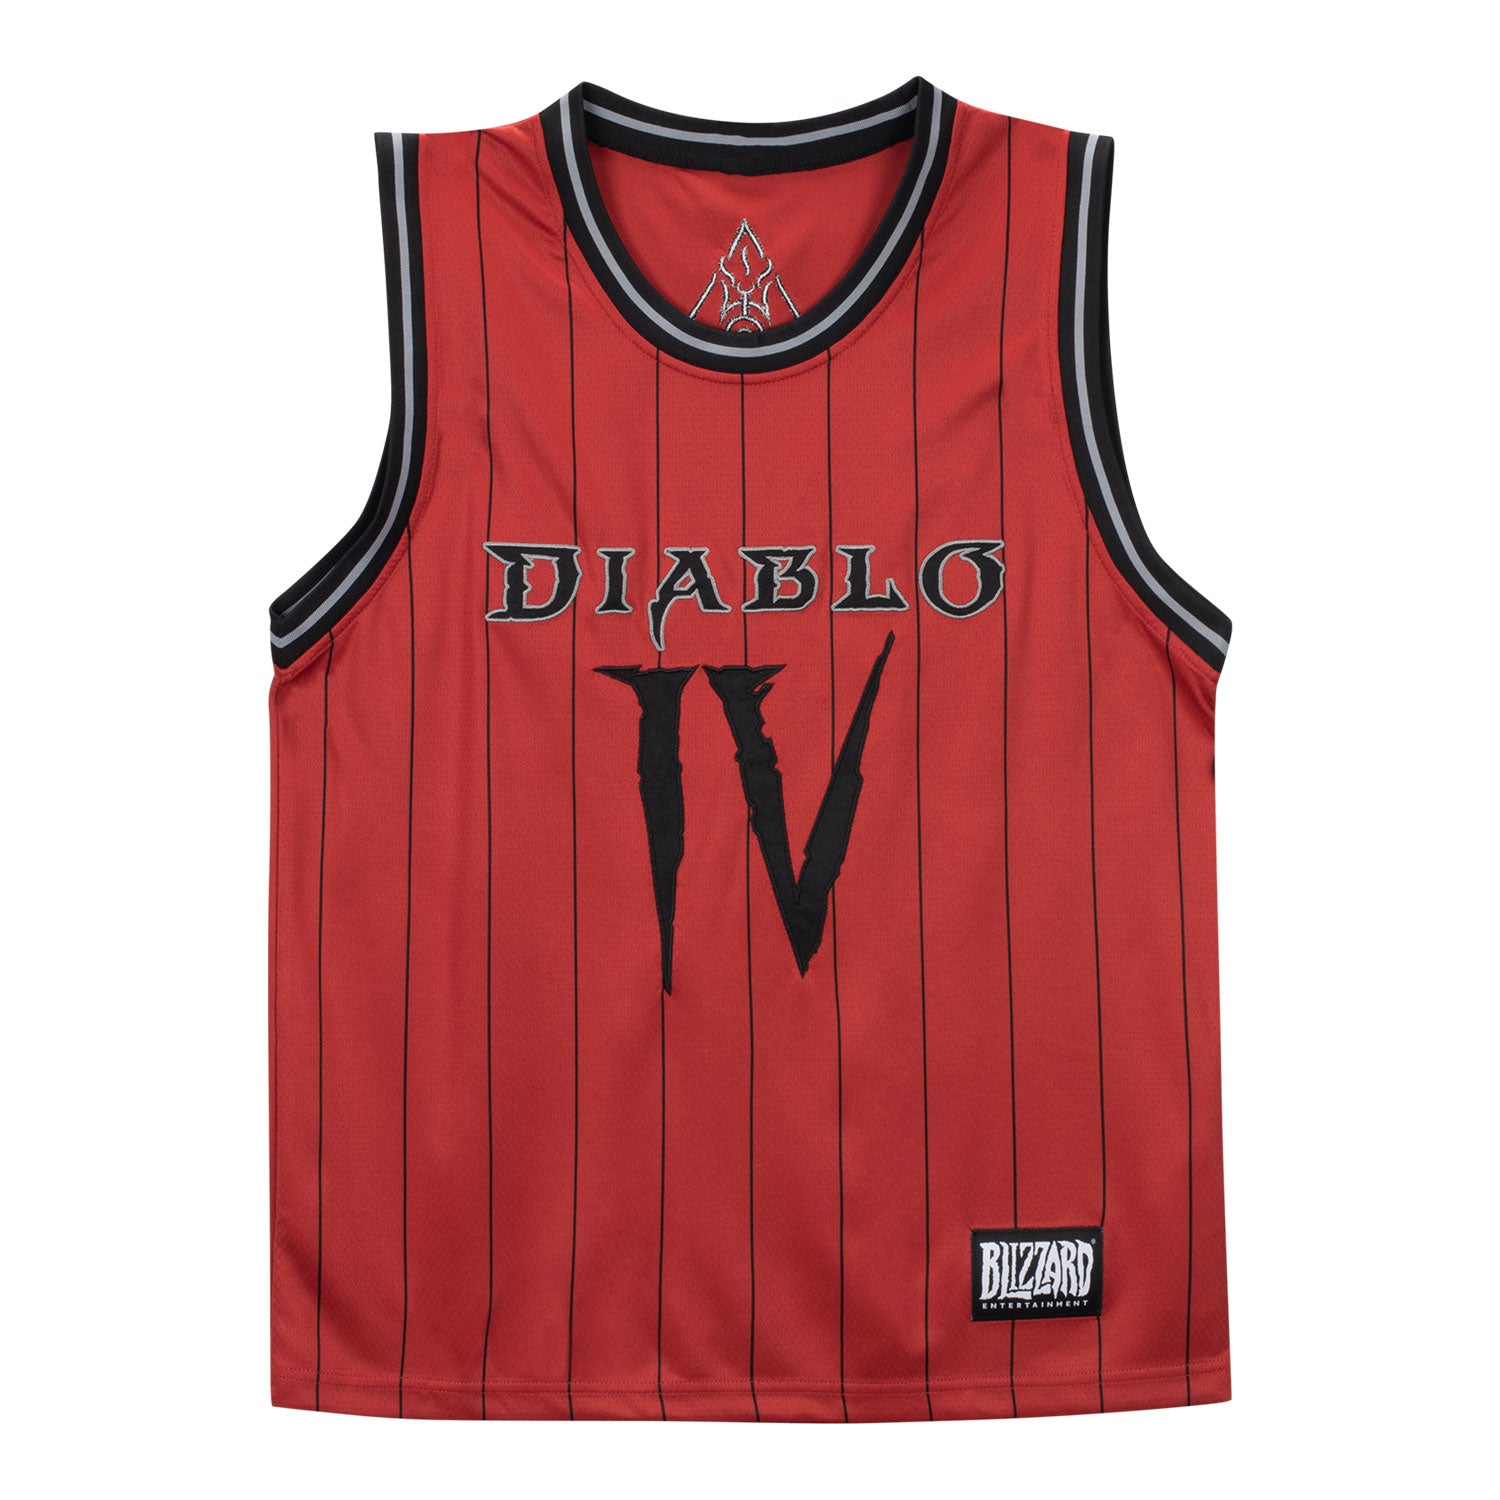 where to buy a basketball jersey near me